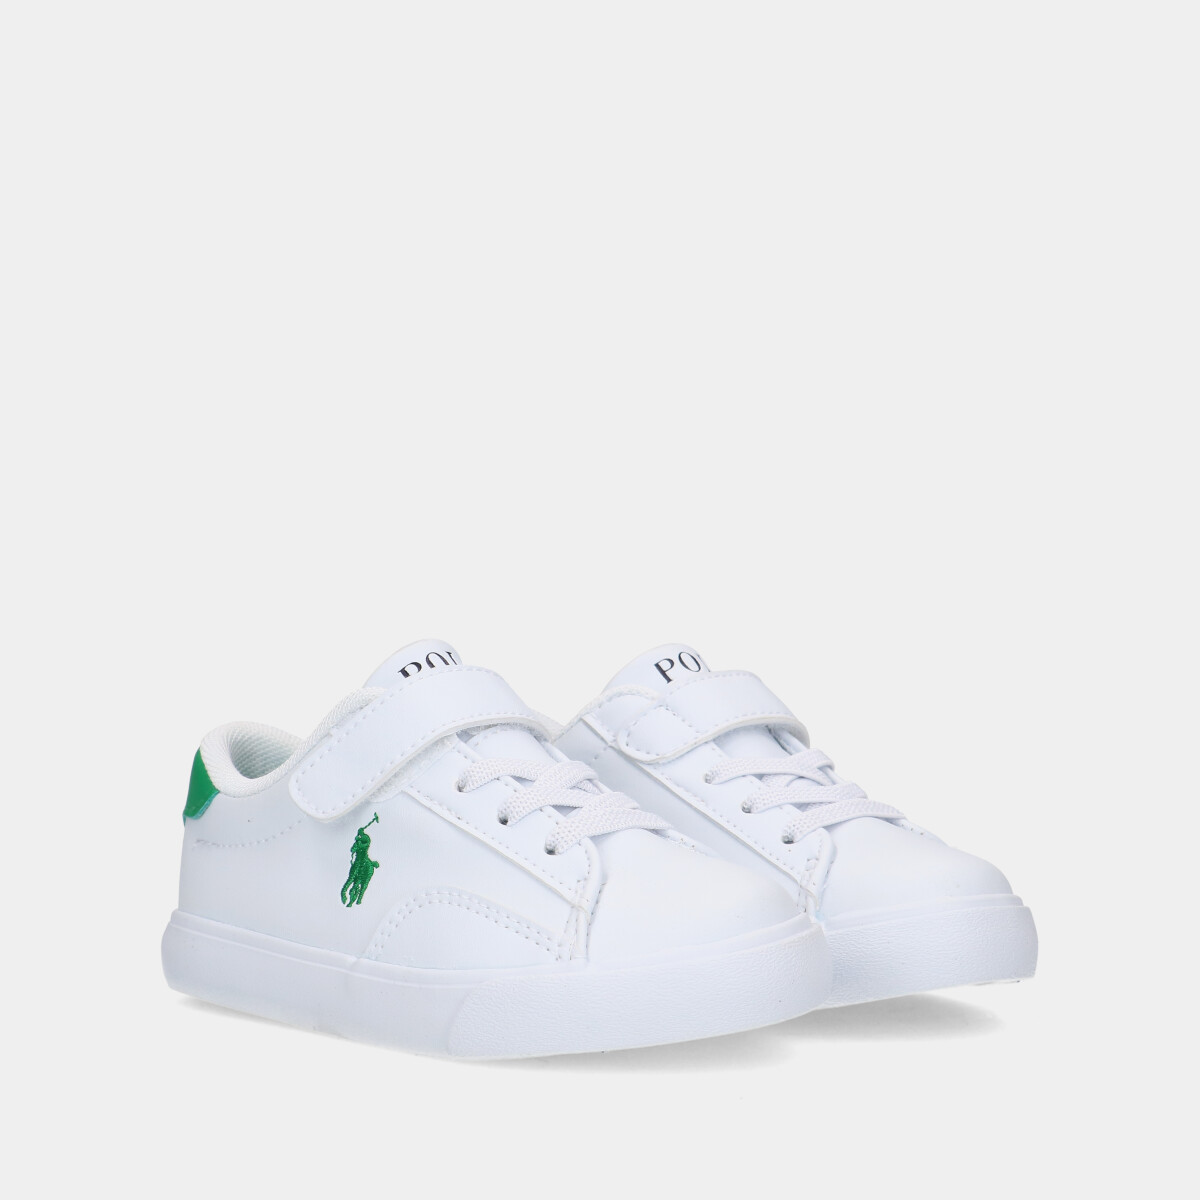 Polo Ralph Lauren Theron V PS White / Green peuter sneakers
